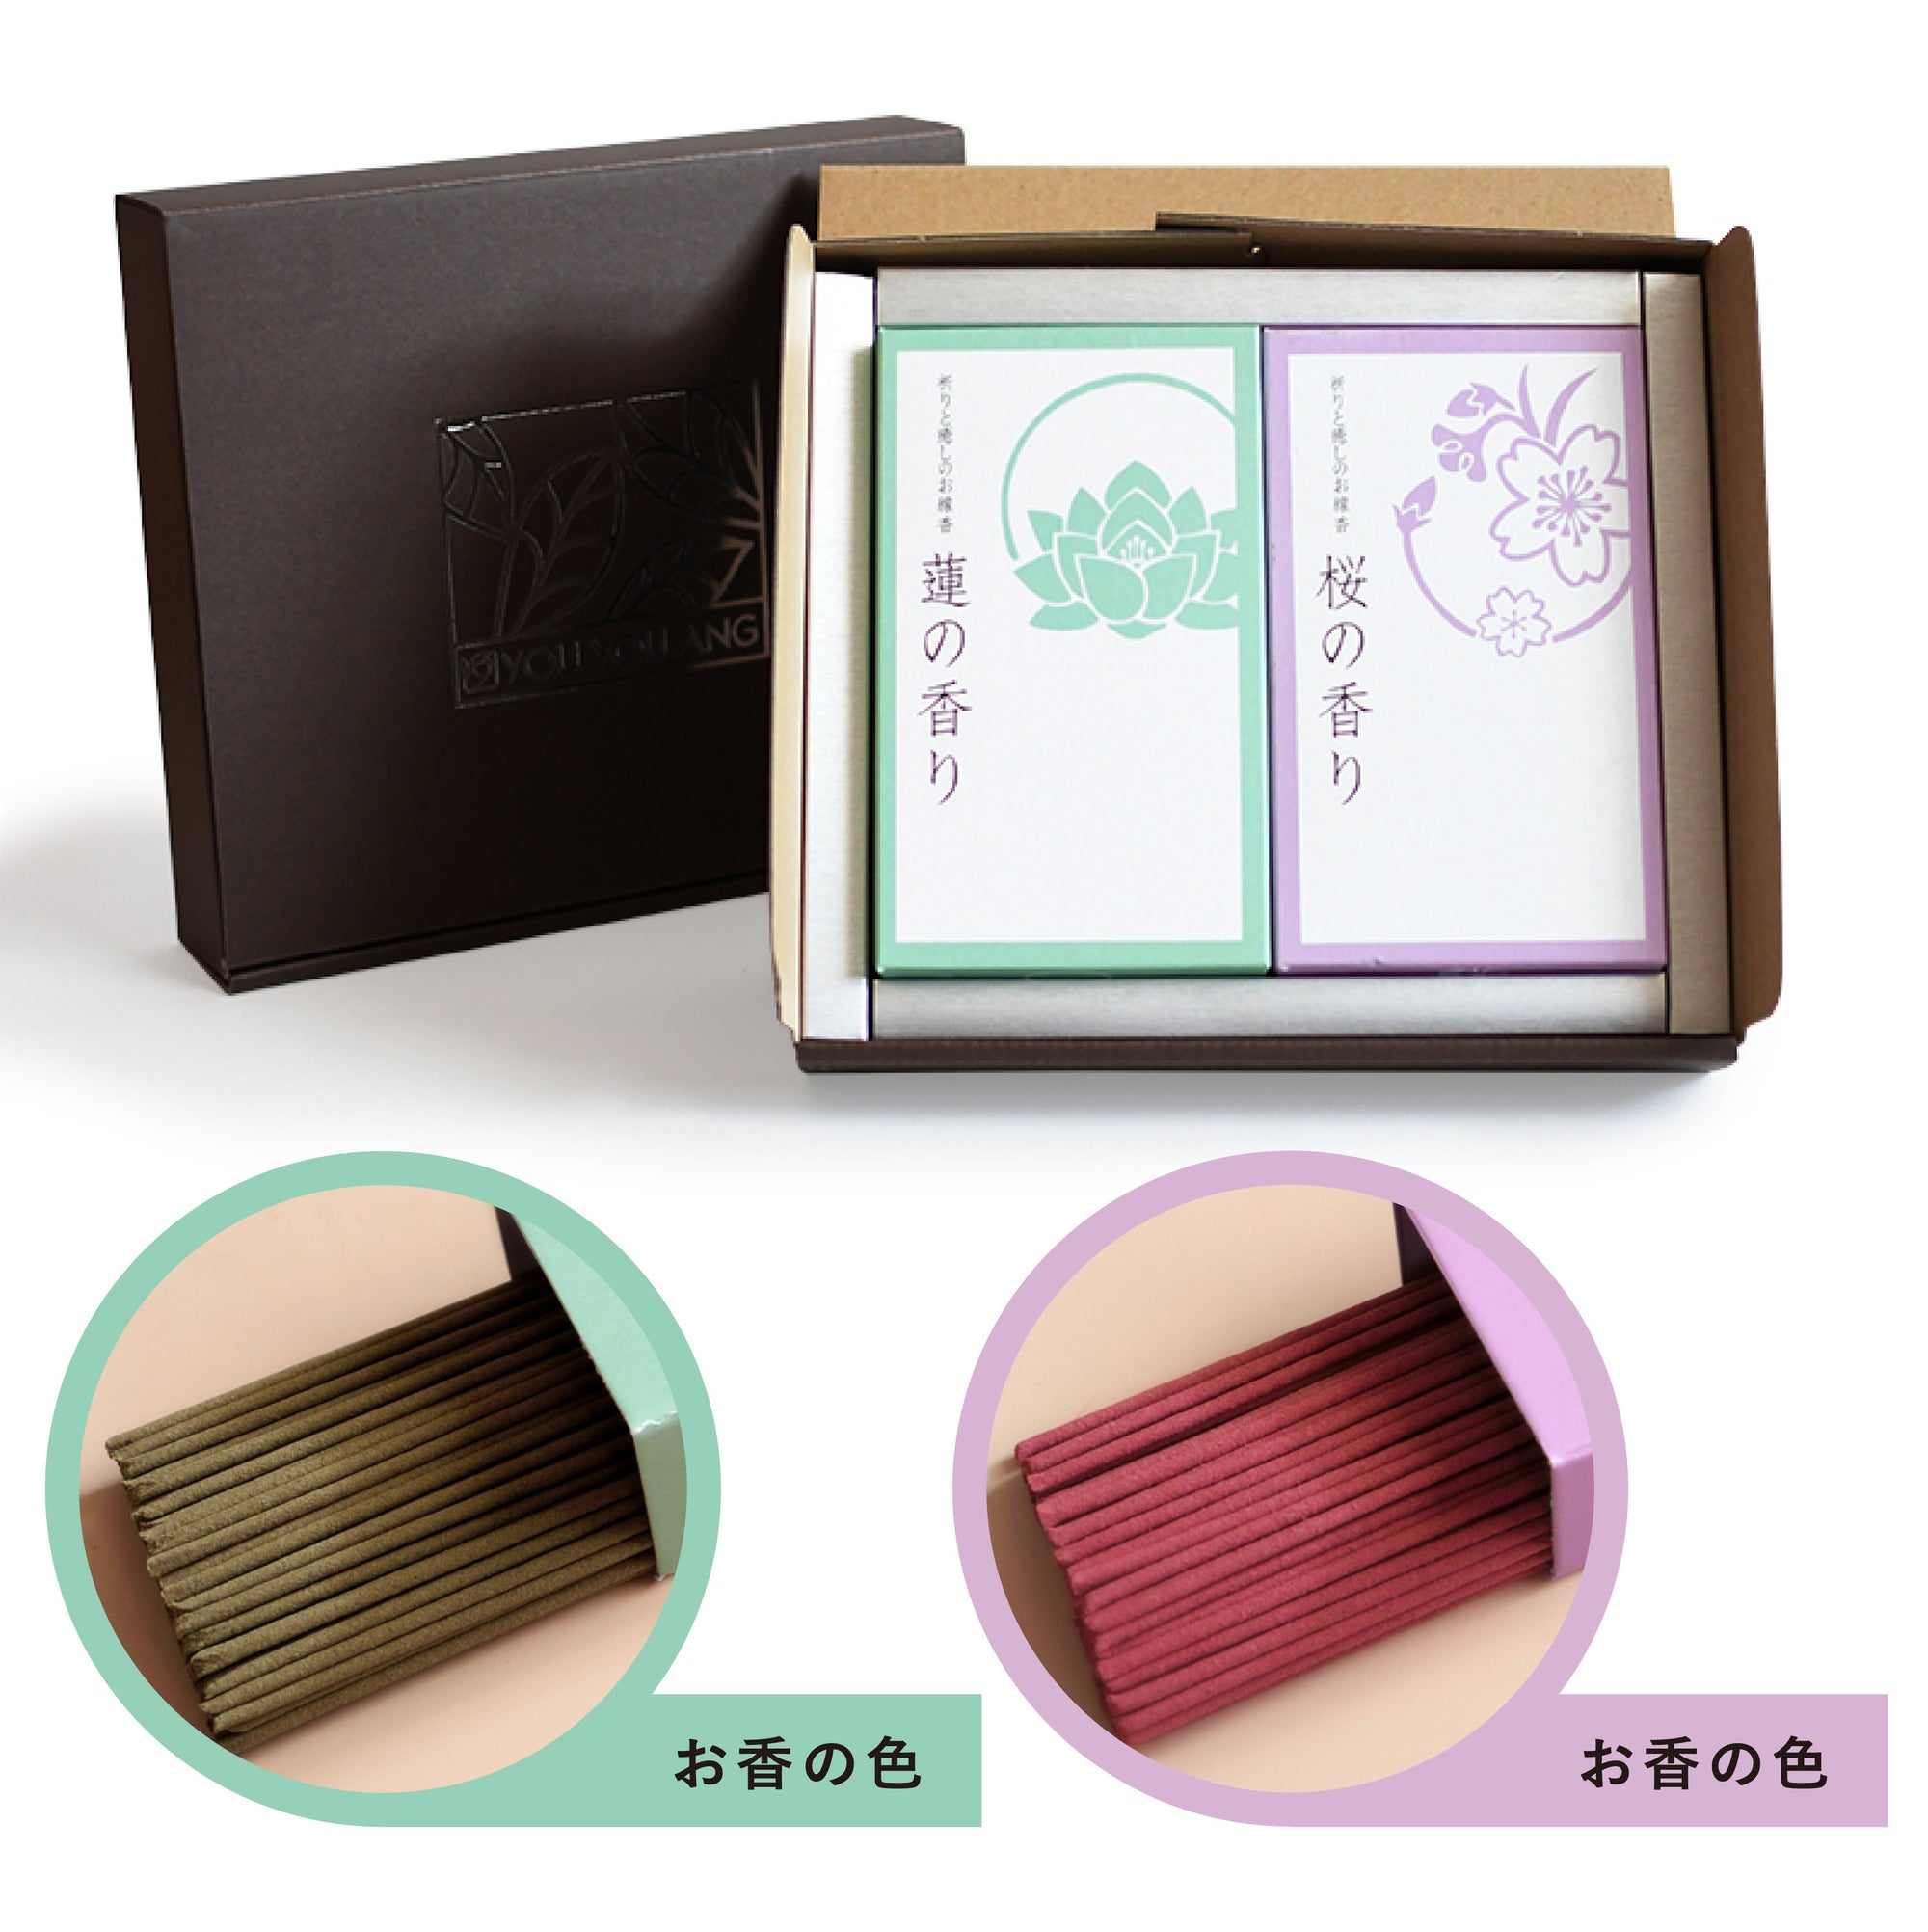 Incense for Healing / Value Box (Lotus, Cherry)